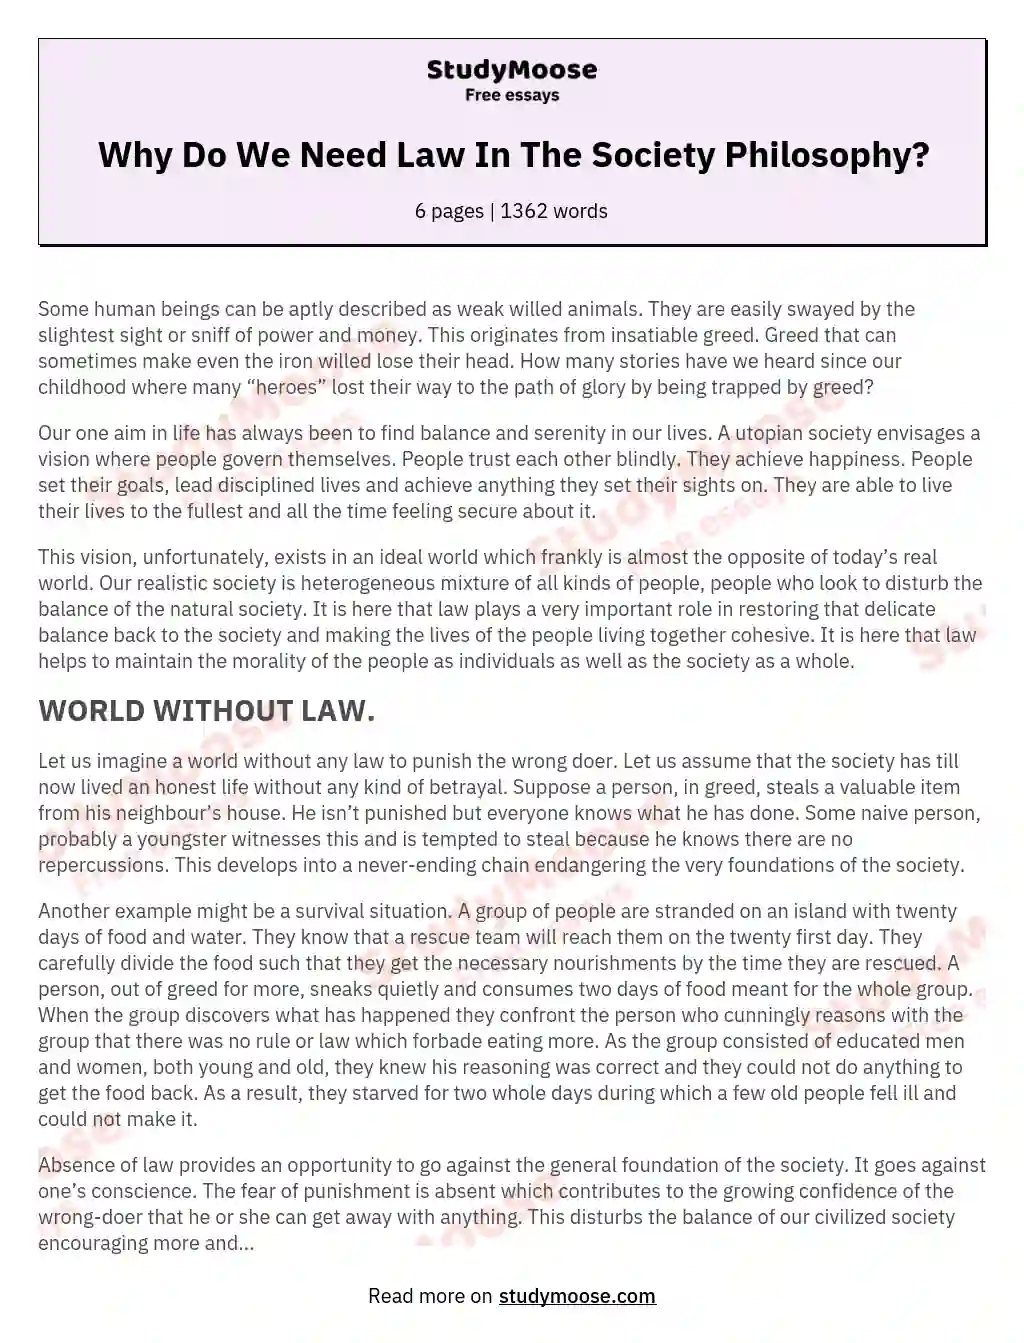 Why Do We Need Law In The Society Philosophy? essay